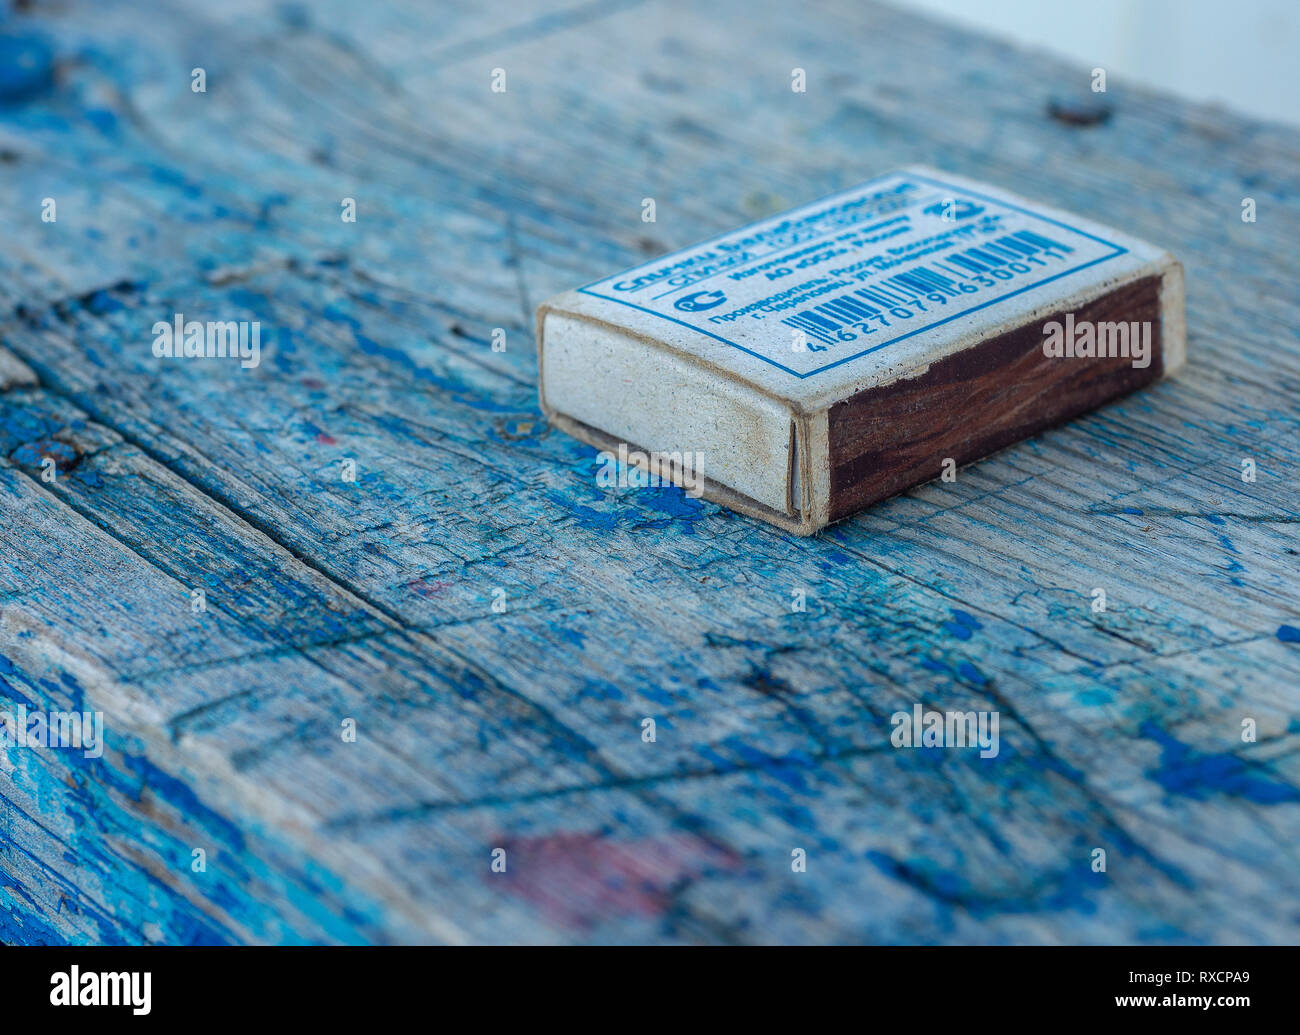 An old light box of matches lies on a worn blue bench. Stock Photo